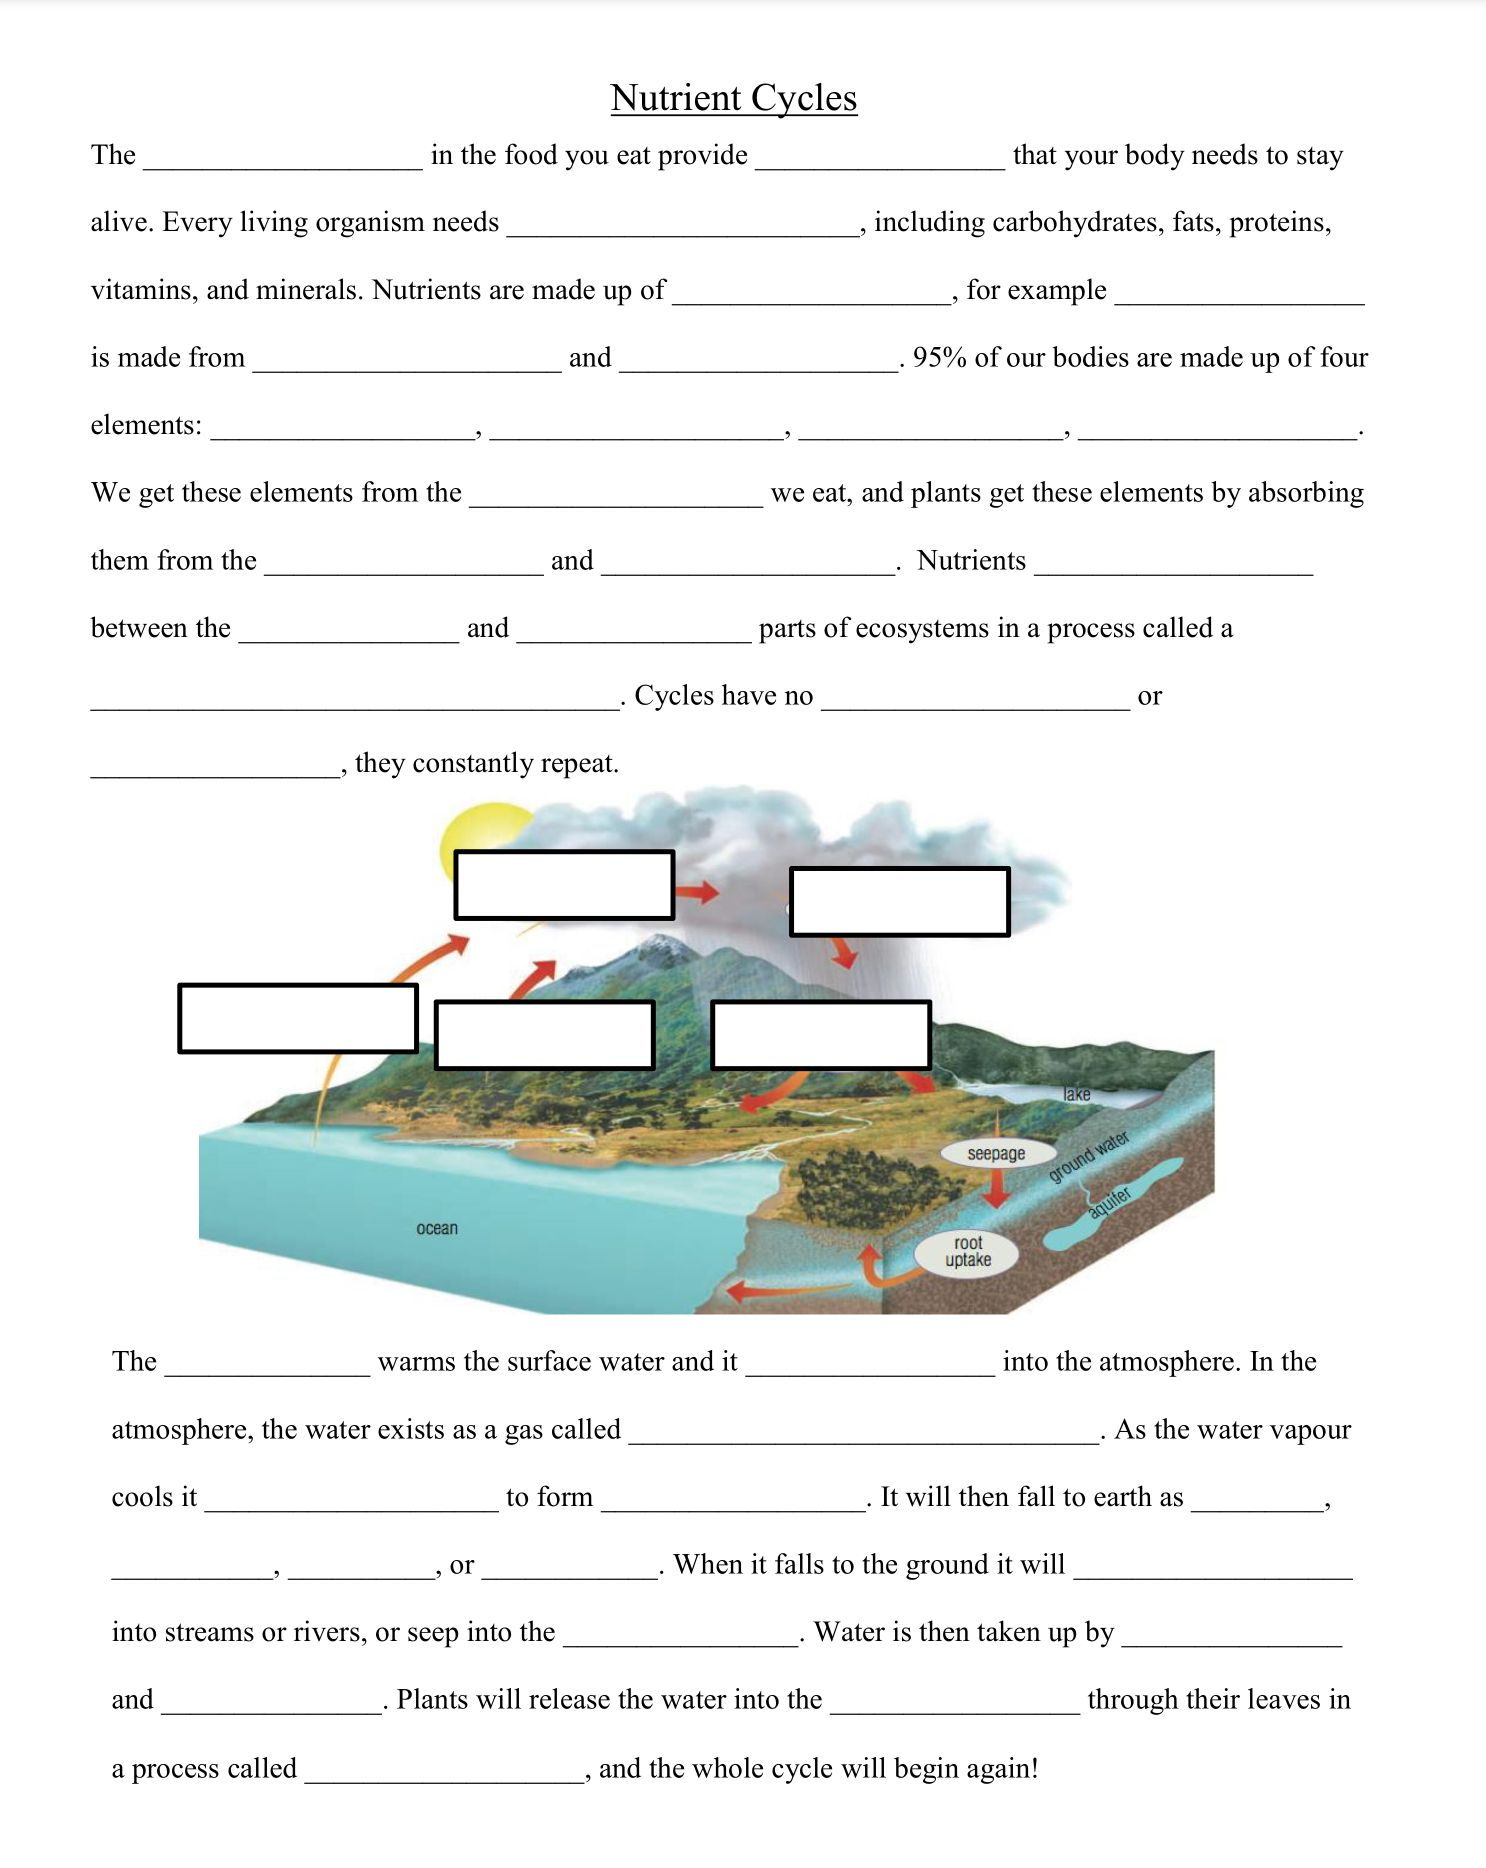 Nutrient Cycles Worksheet Wednesday May 22 2019 Nutrient Cycle